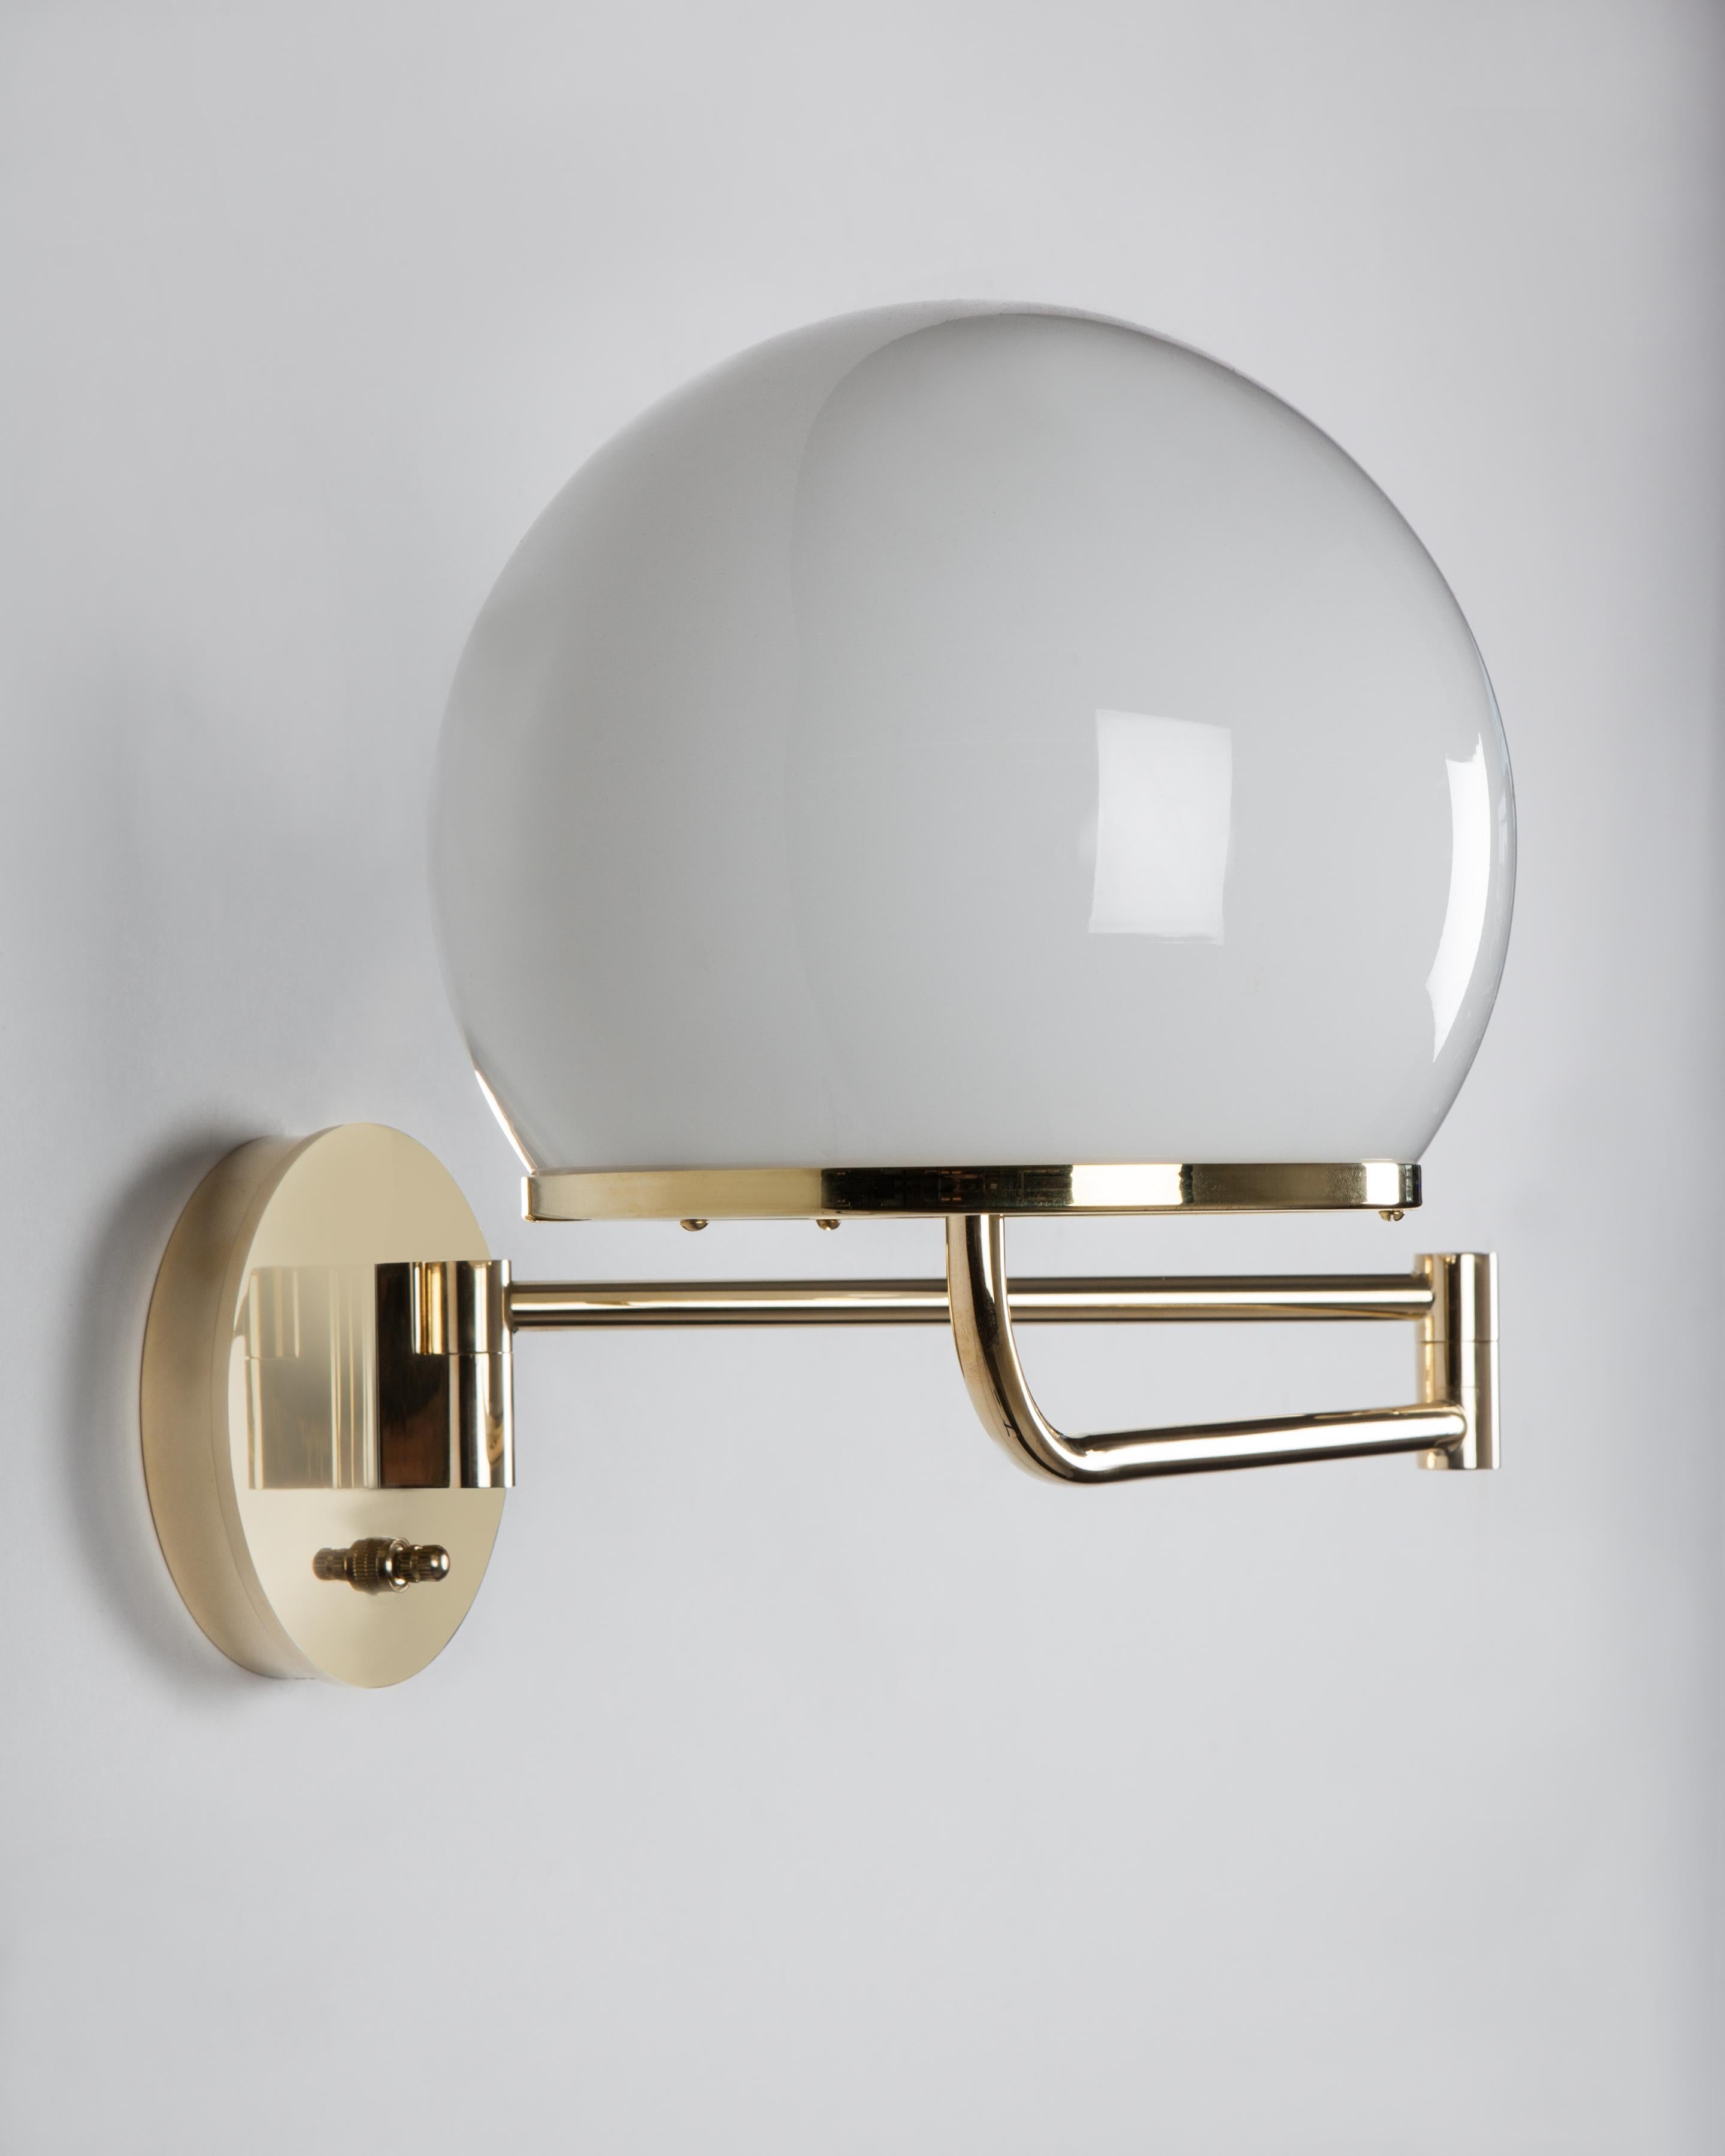 WIS2223.S
The Ingersoll swing-arm sconce by Remains Lighting has a simple yet elegant form with a minimal in-curving ring supporting its almost full-round white milk glass shade. This wall light features a simple swing arm mechanism, adjustable from